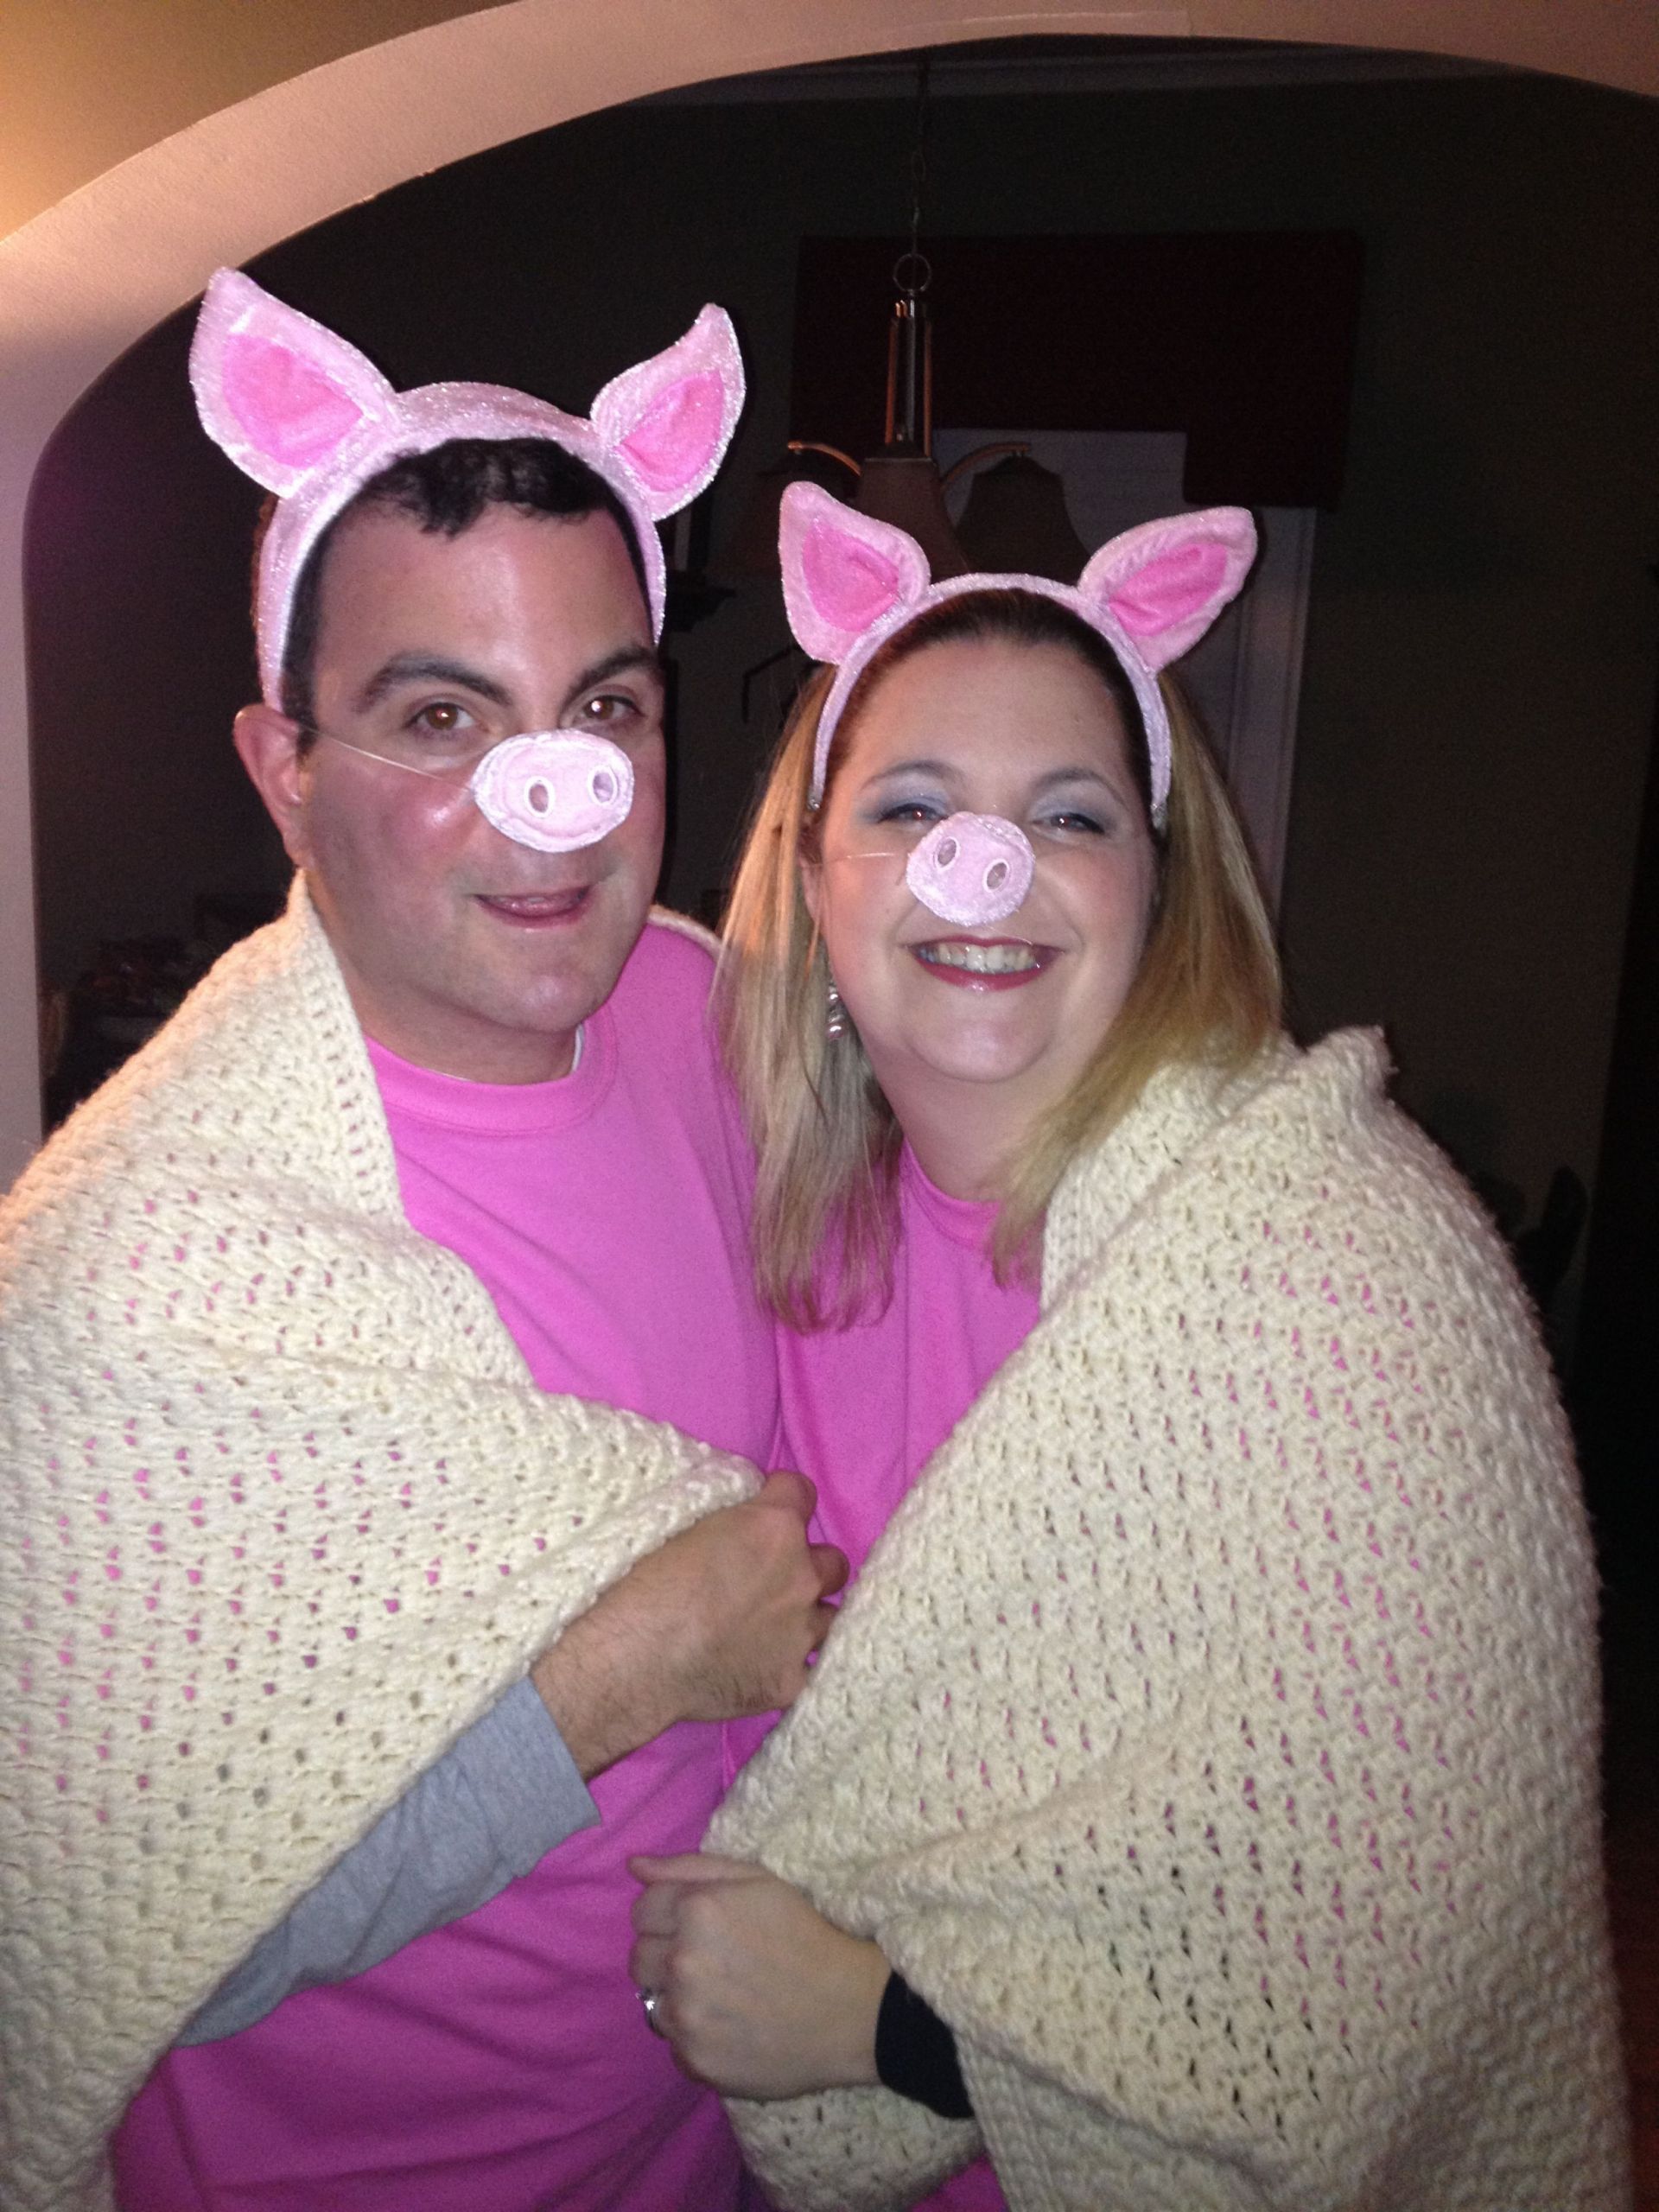 DIY Pig Costume
 17 DIY Couples Costumes That Will WIN Halloween